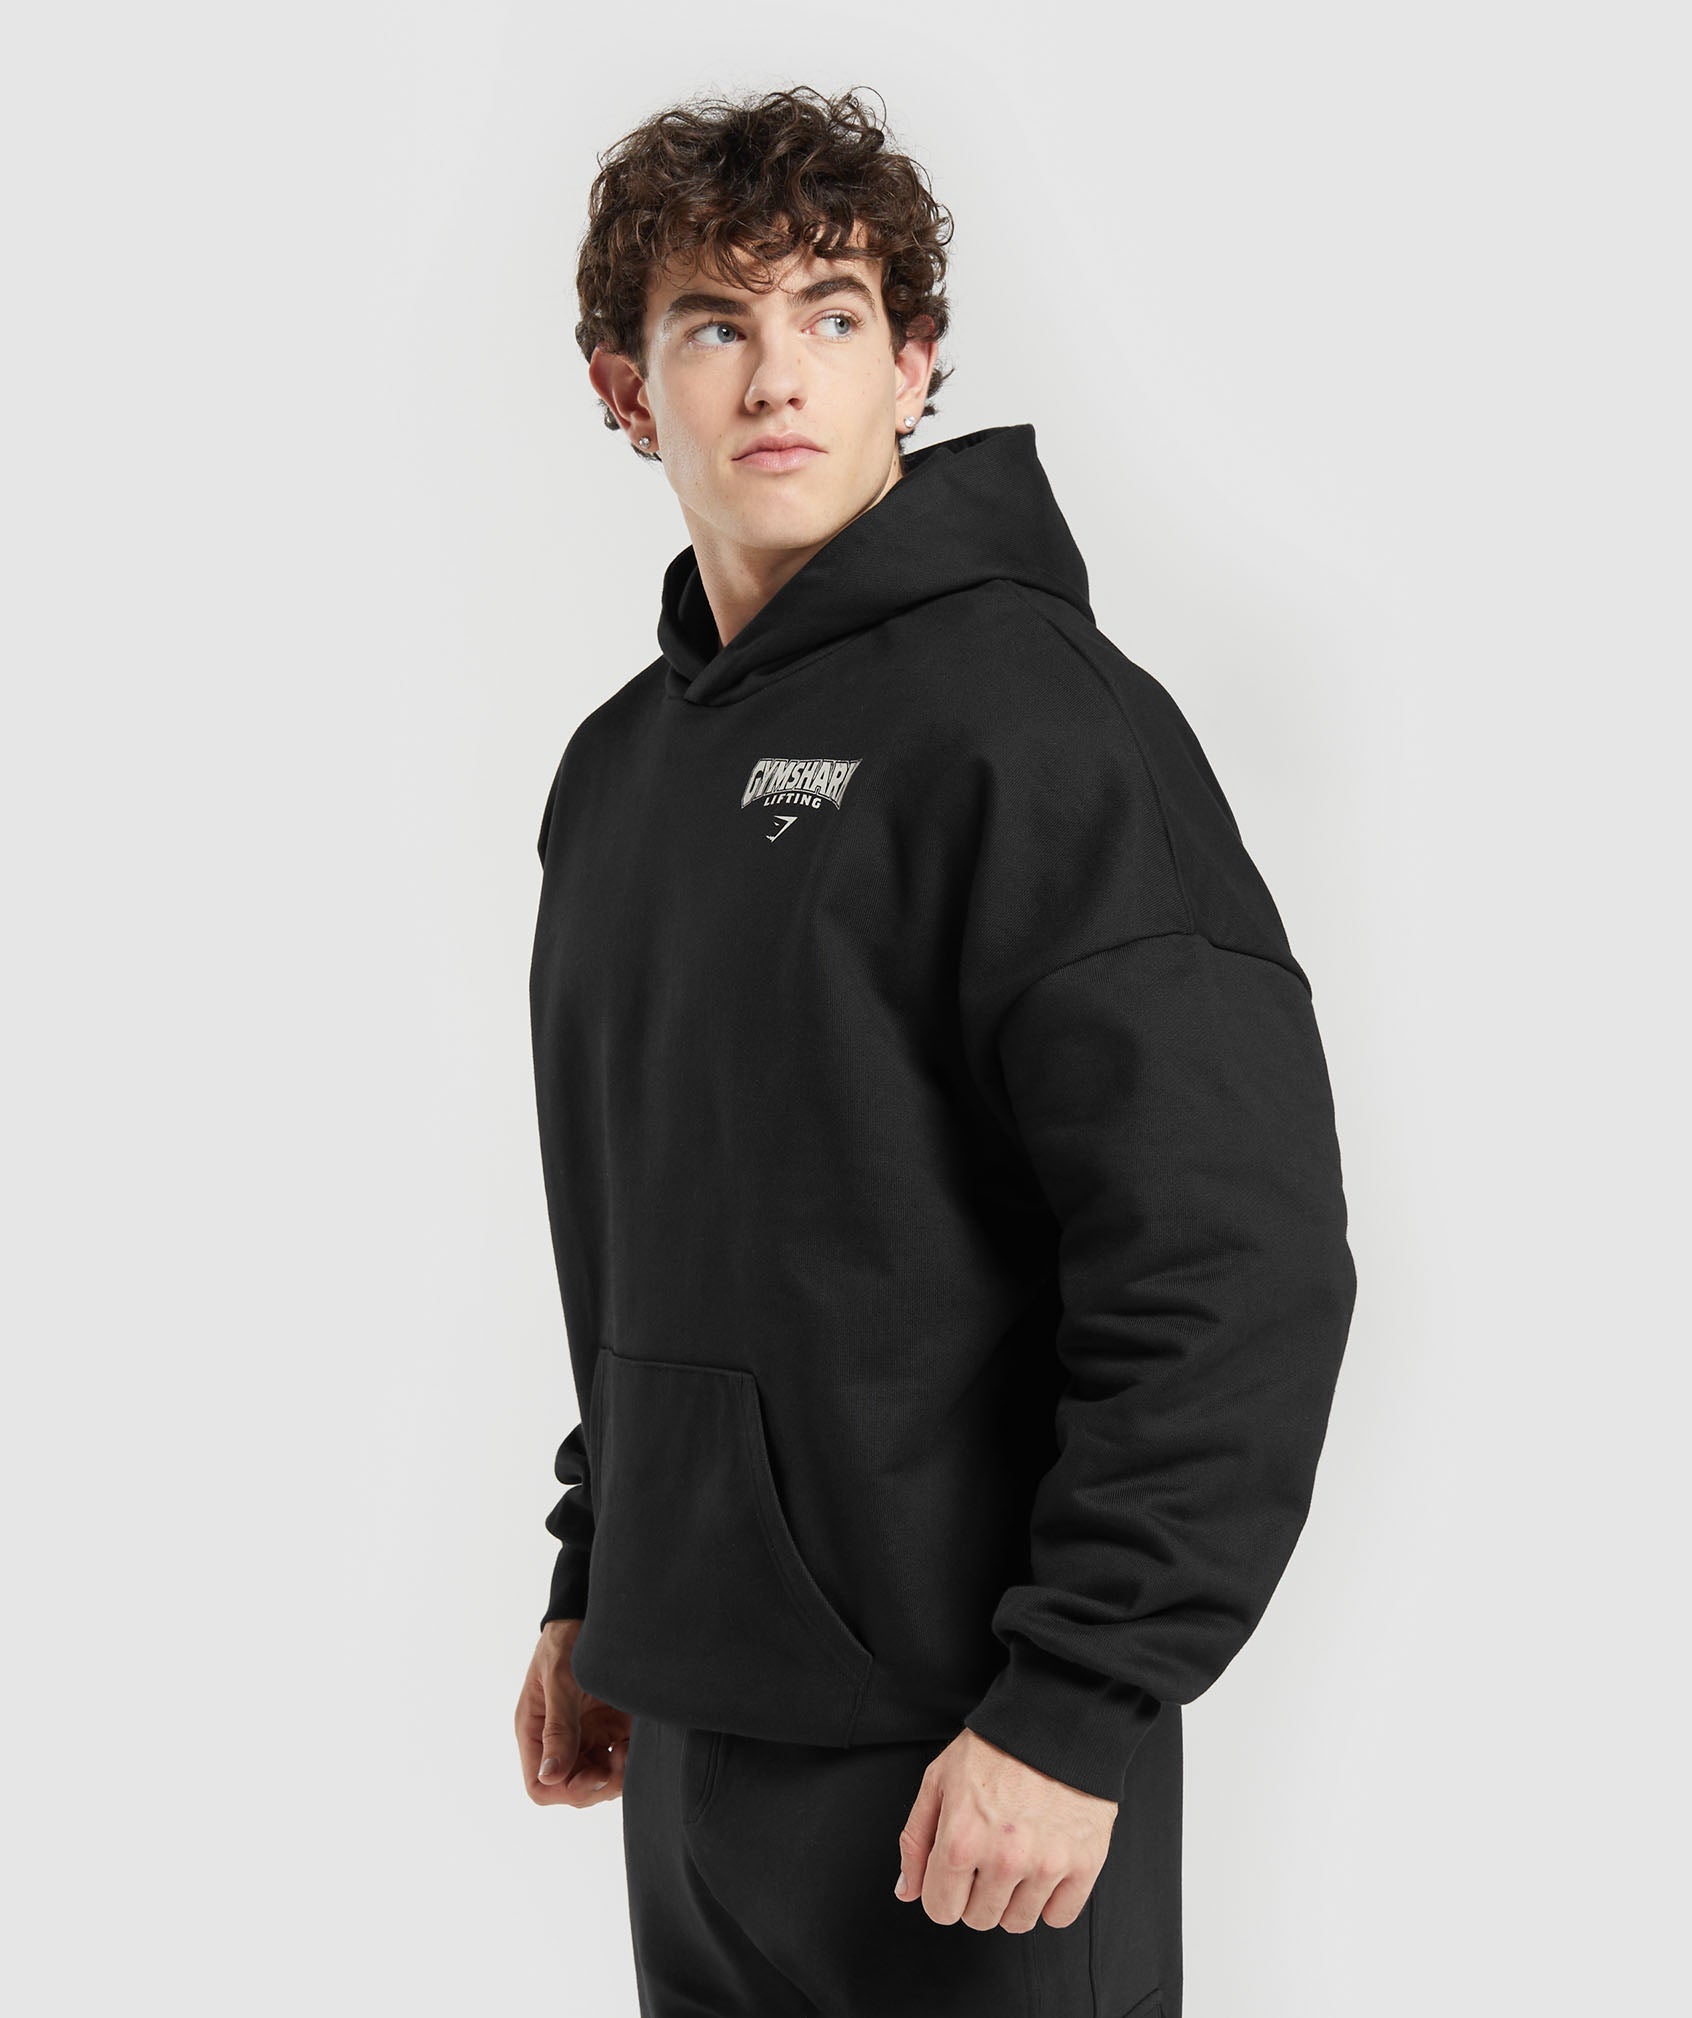 Committed to the Craft Hoodie in Black - view 3